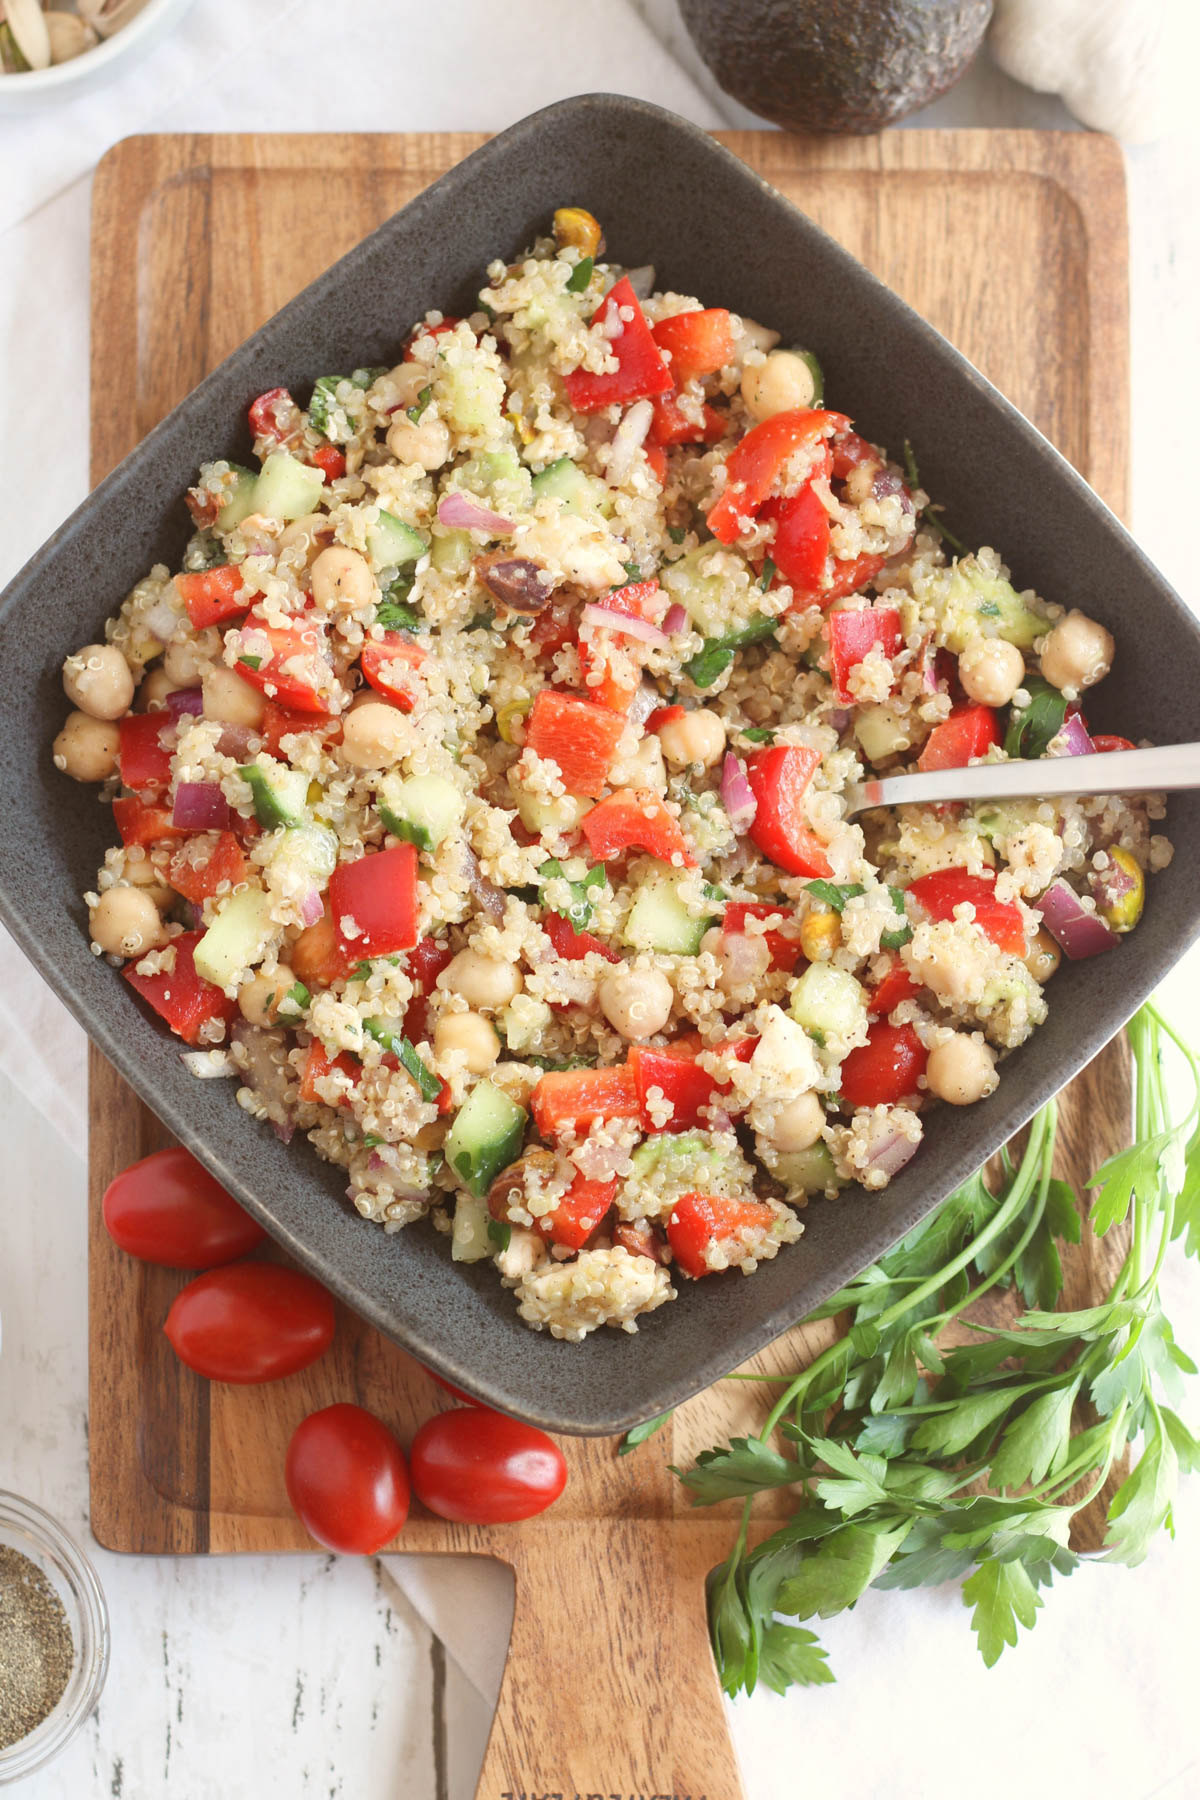 Quinoa salad is displayed in a dark, rectangular bowl with tomatoes and herbs scattered around the bowl. A spoon is visible in the salad. 